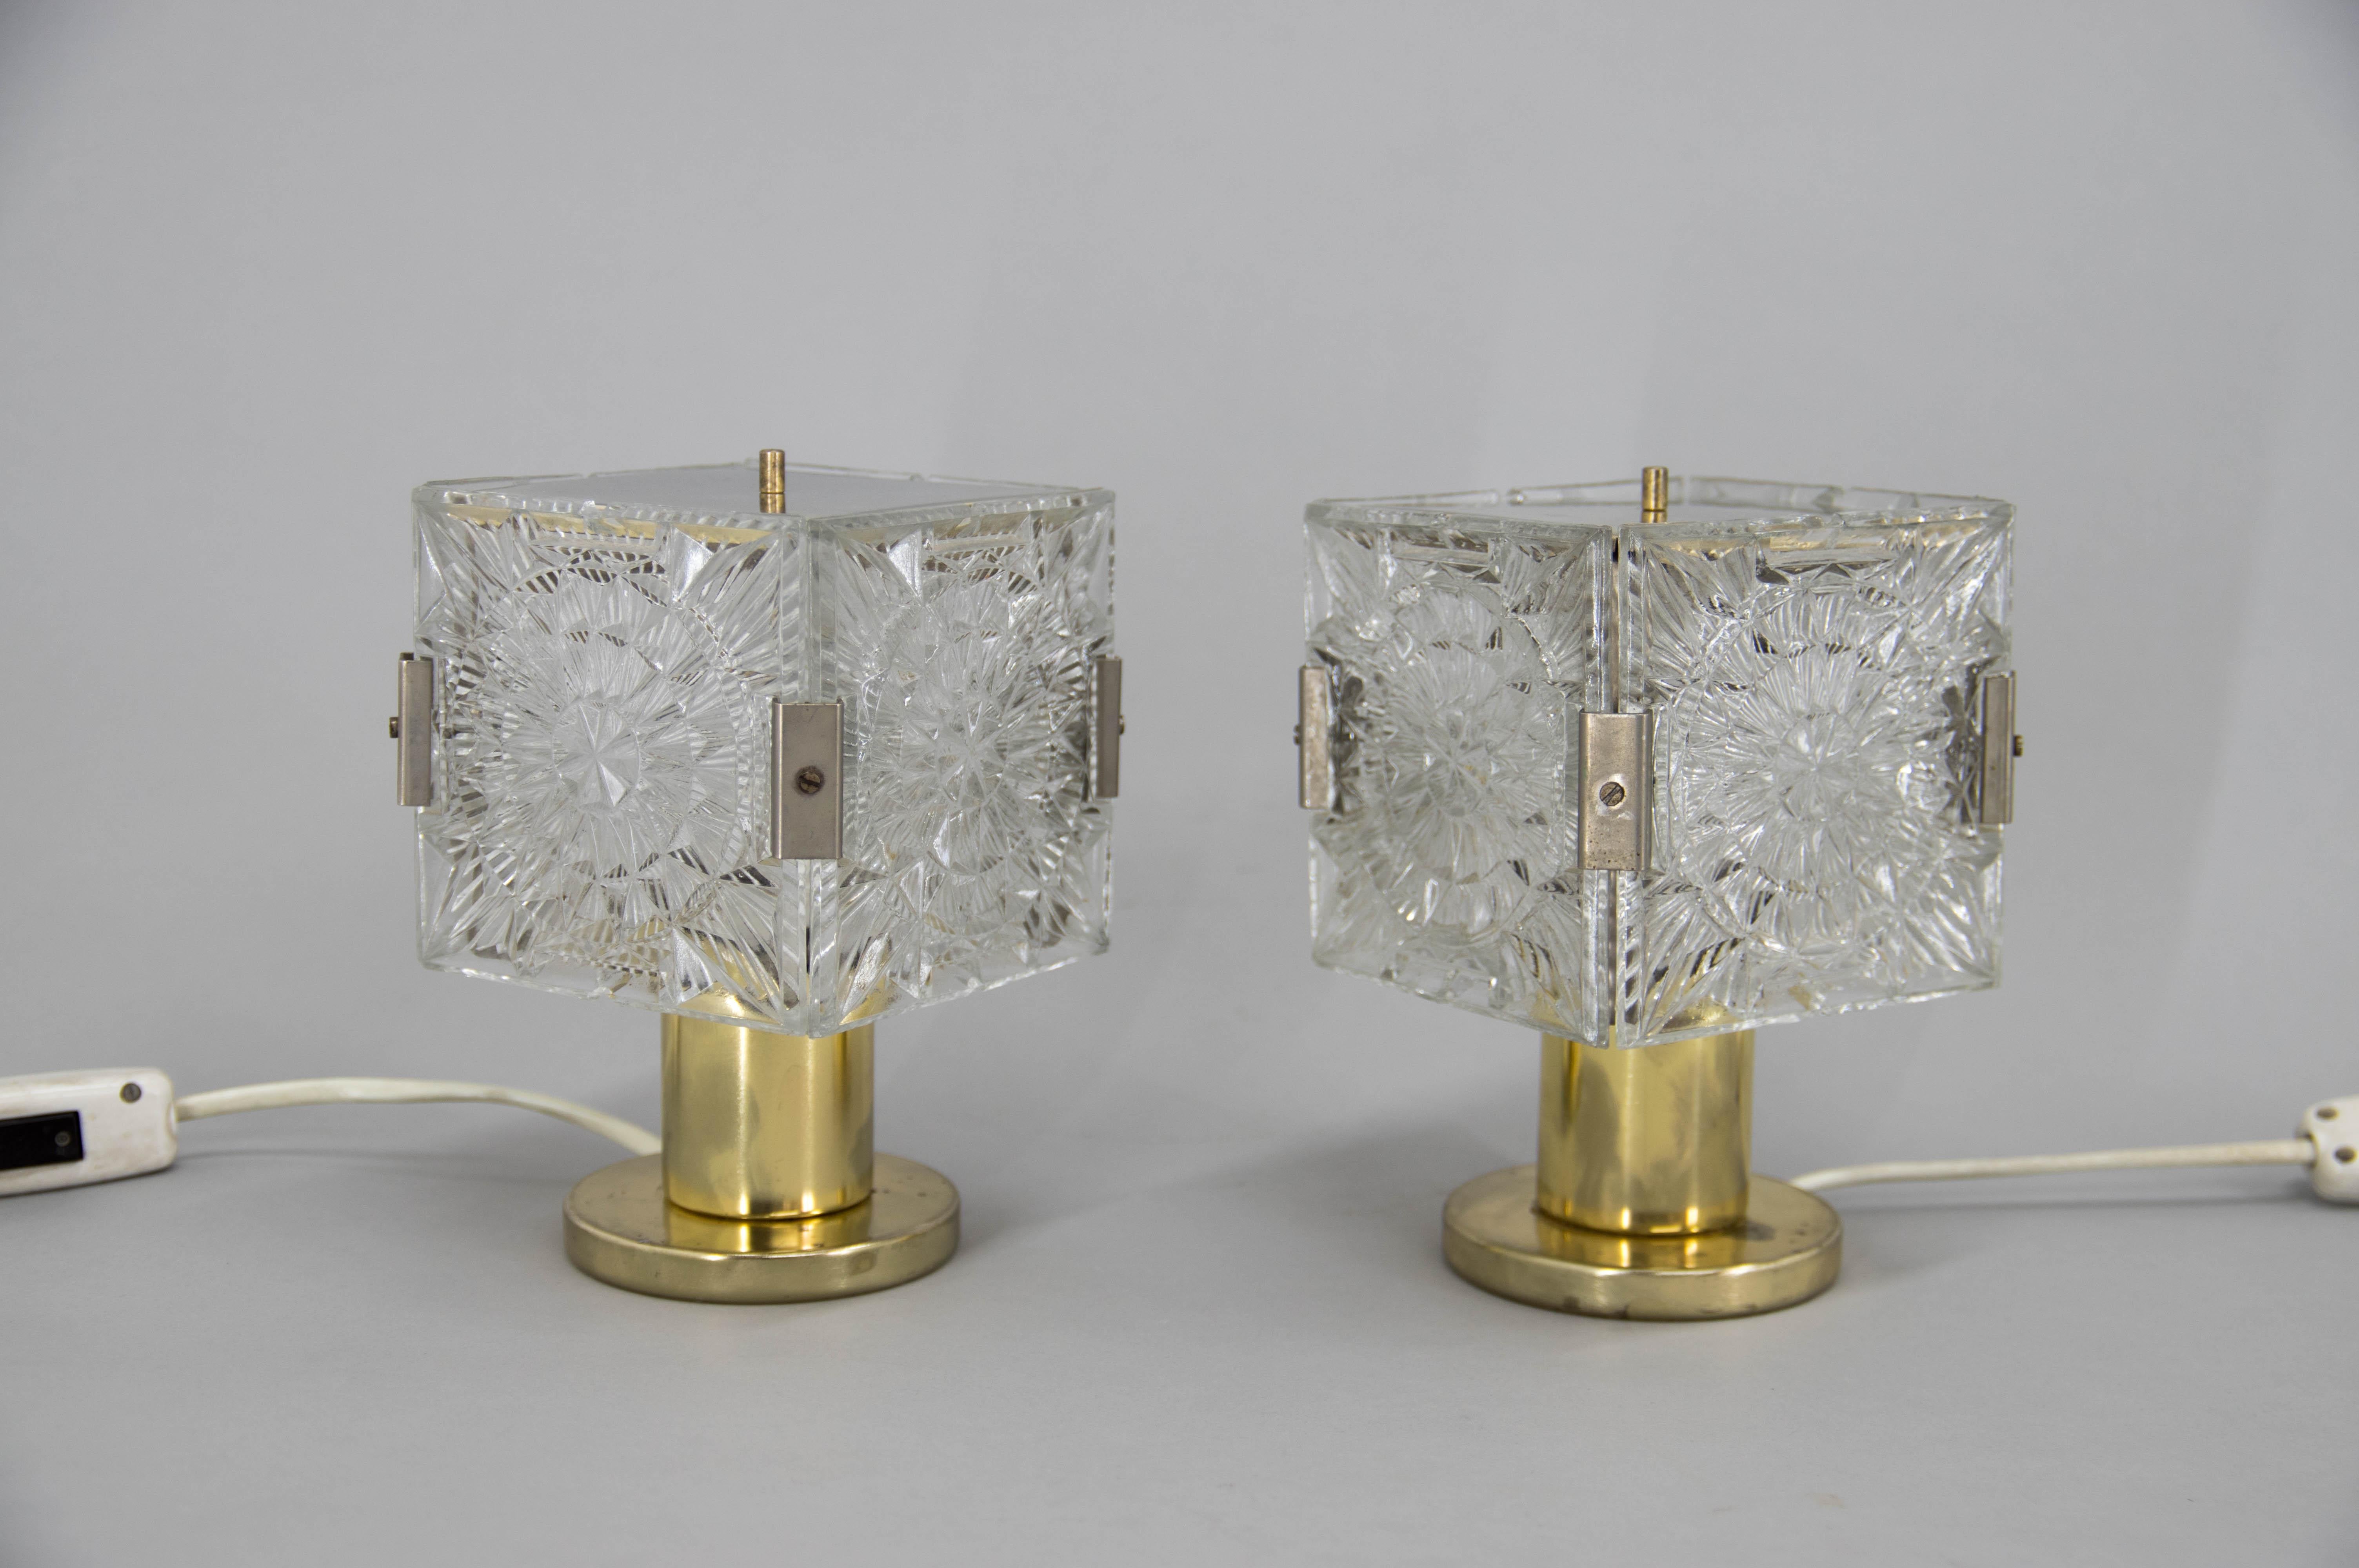 Design table lamps with brass base and glass shades. More sets available.
Very good original condition. Marked by Kamenicky Senov.
1x40W, E25-E27 bulb
US plug adapter included.